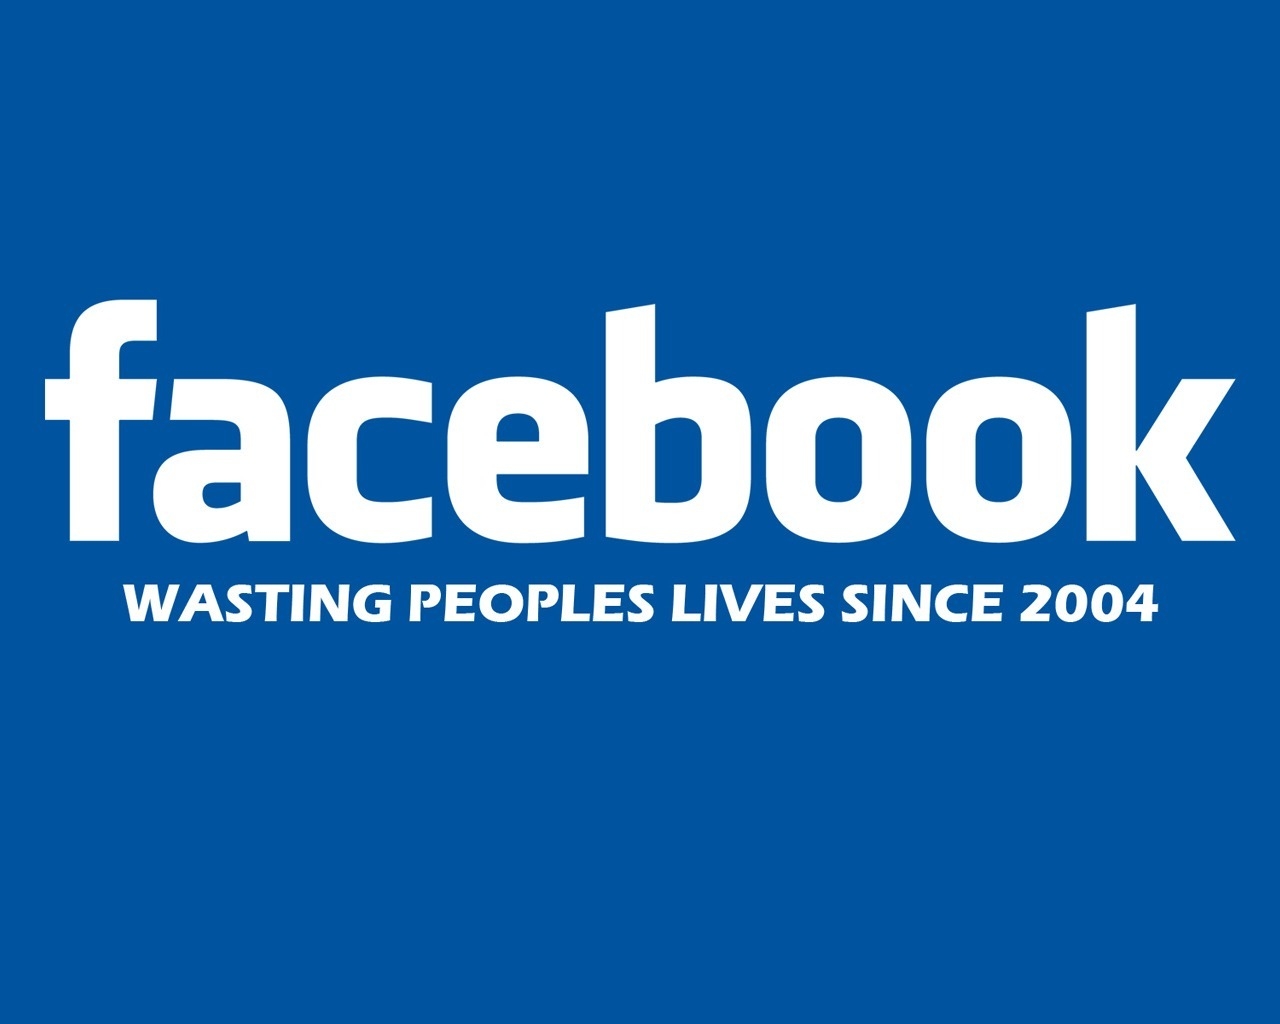 Facebook for 1280 x 1024 resolution